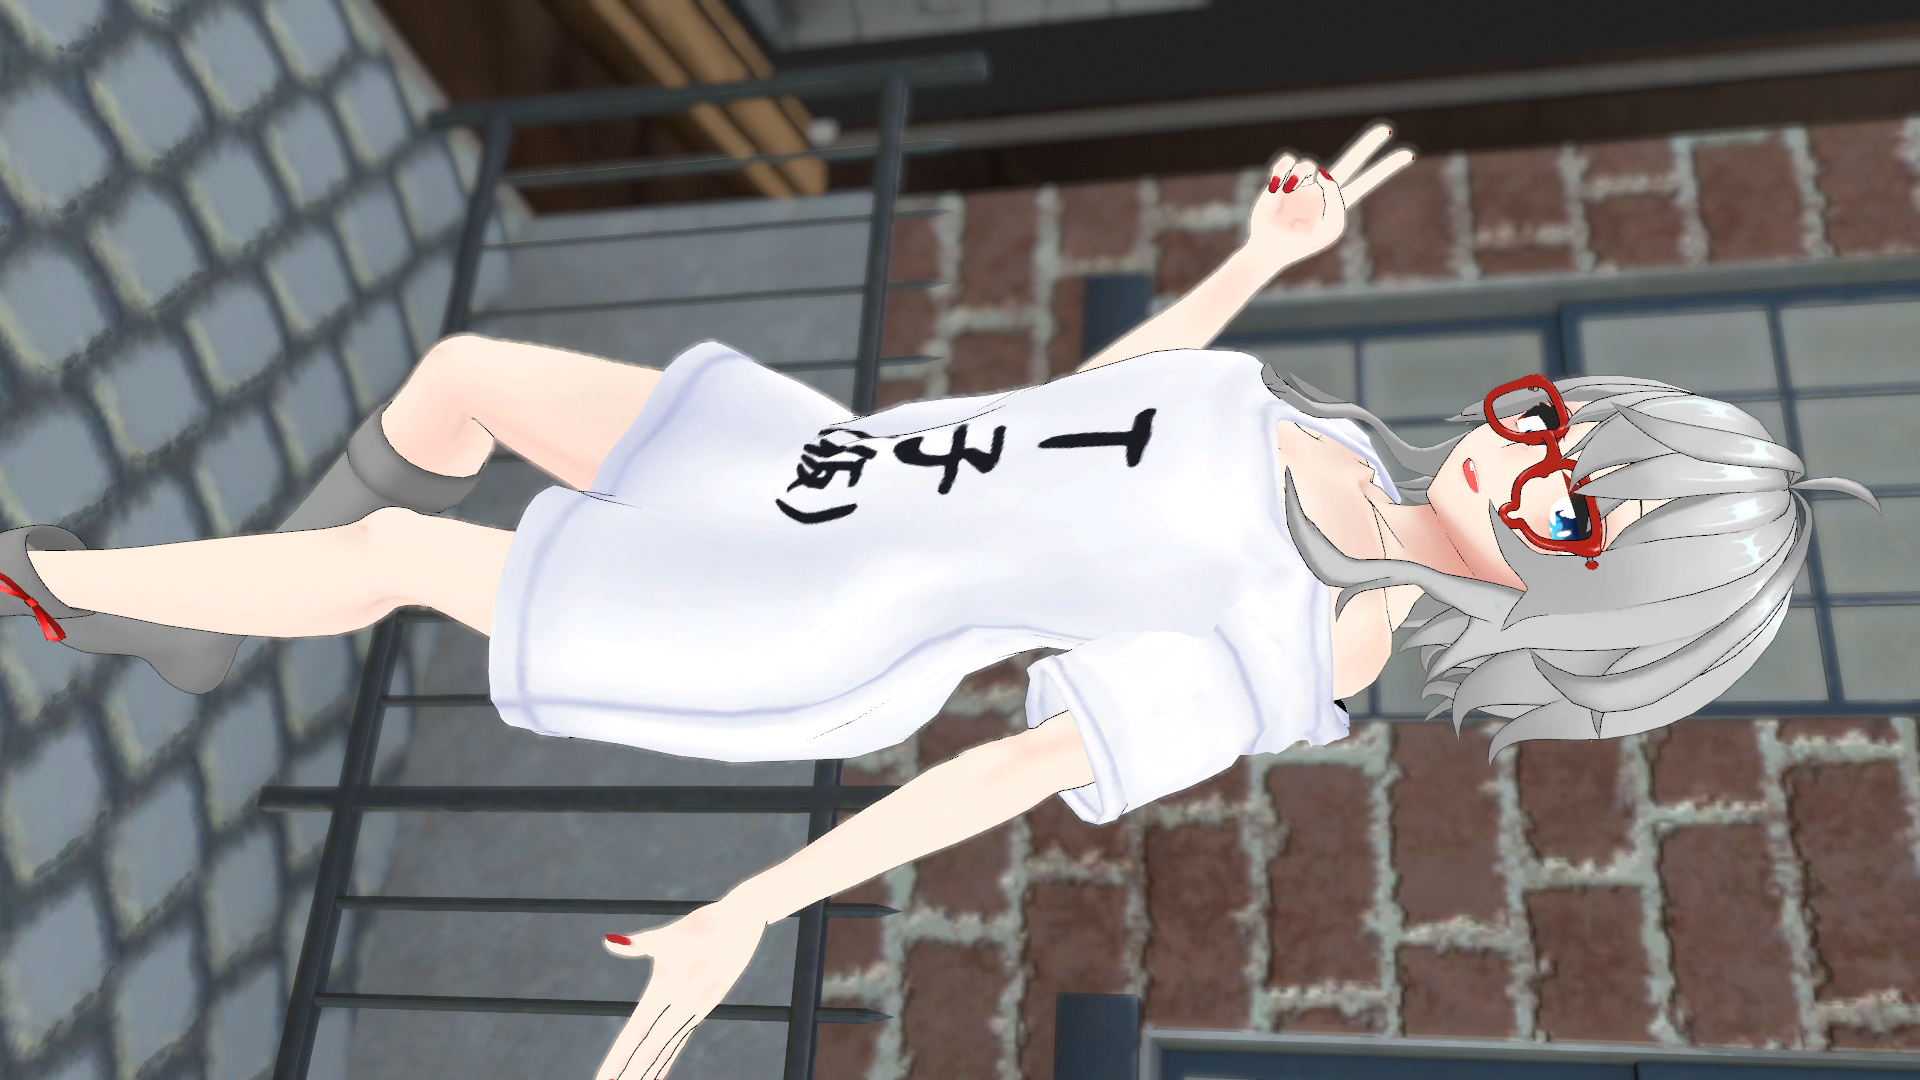 VRChat_1920x1080_2021-12-05_04-15-49.692.png